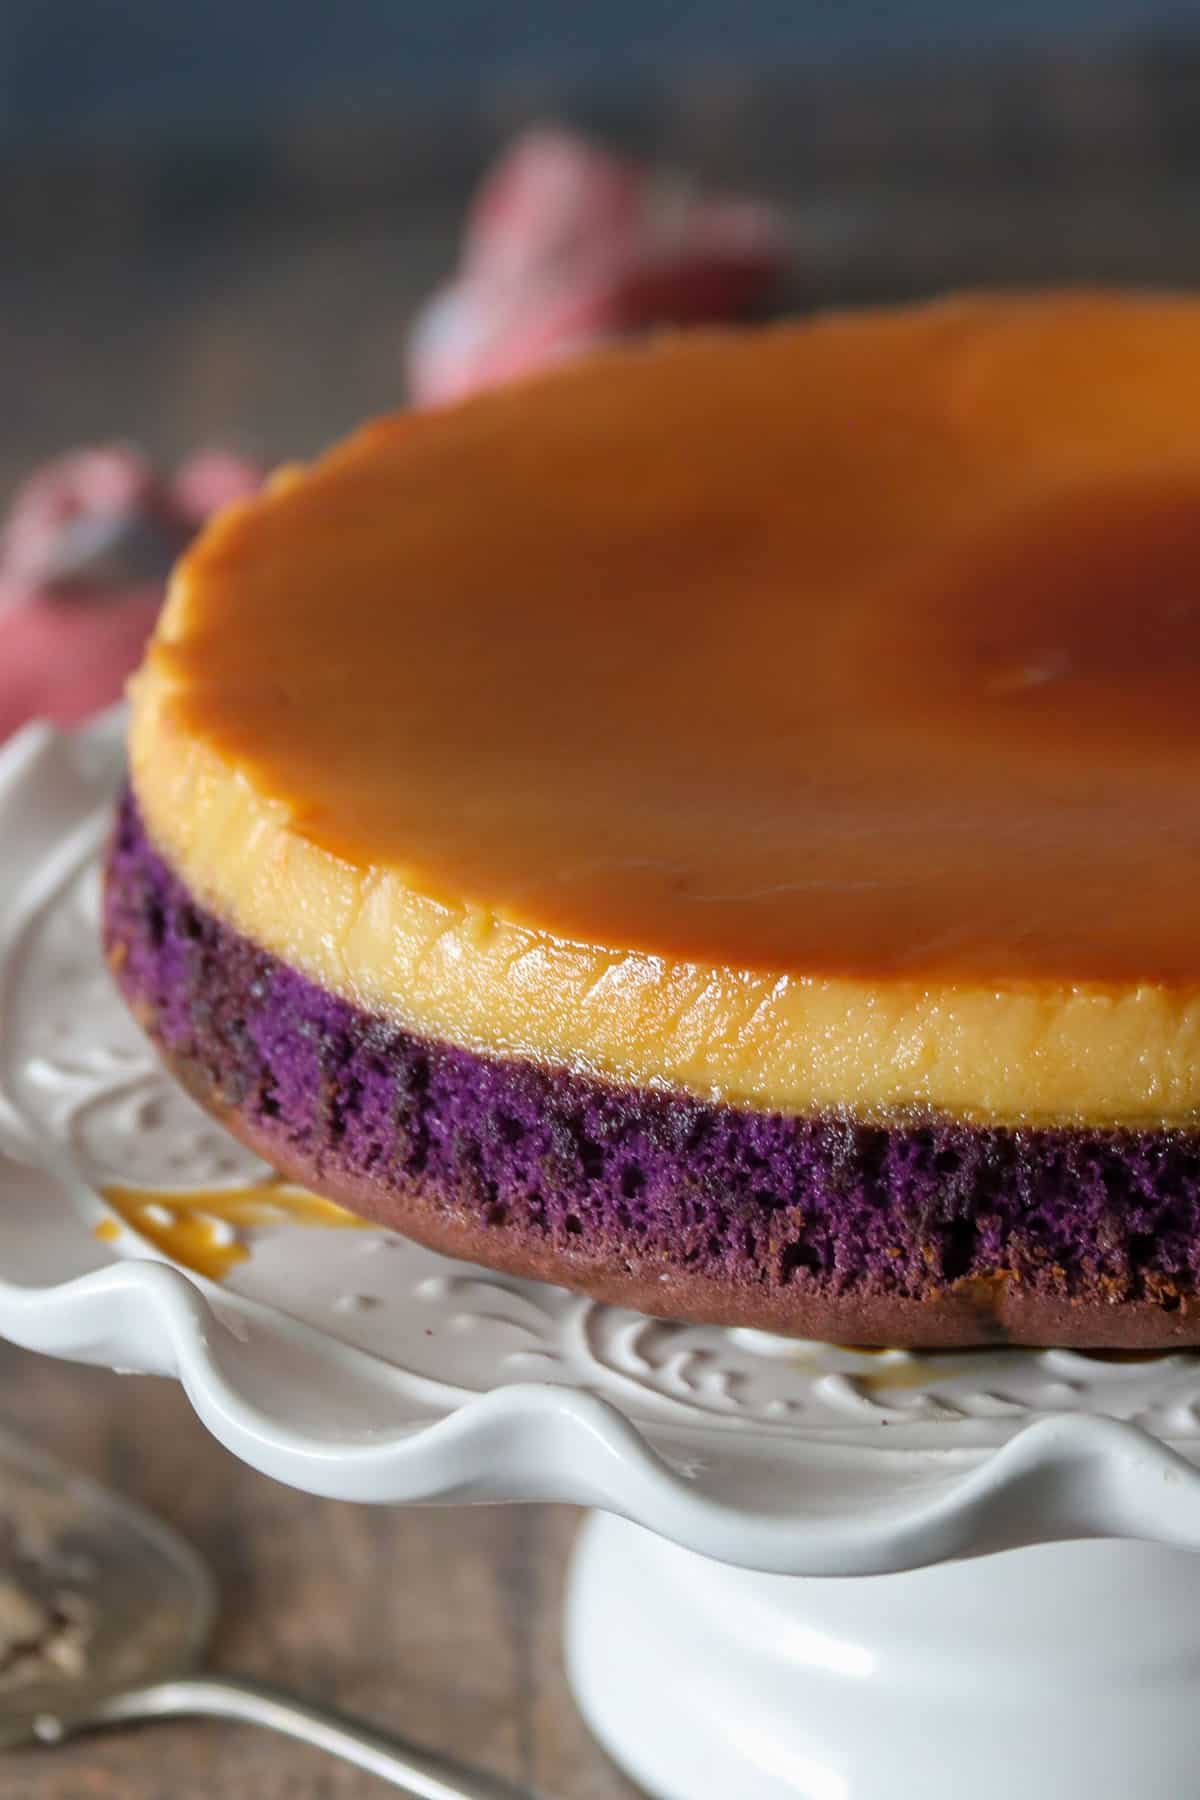 The whole ube flan cake on a cake stand.